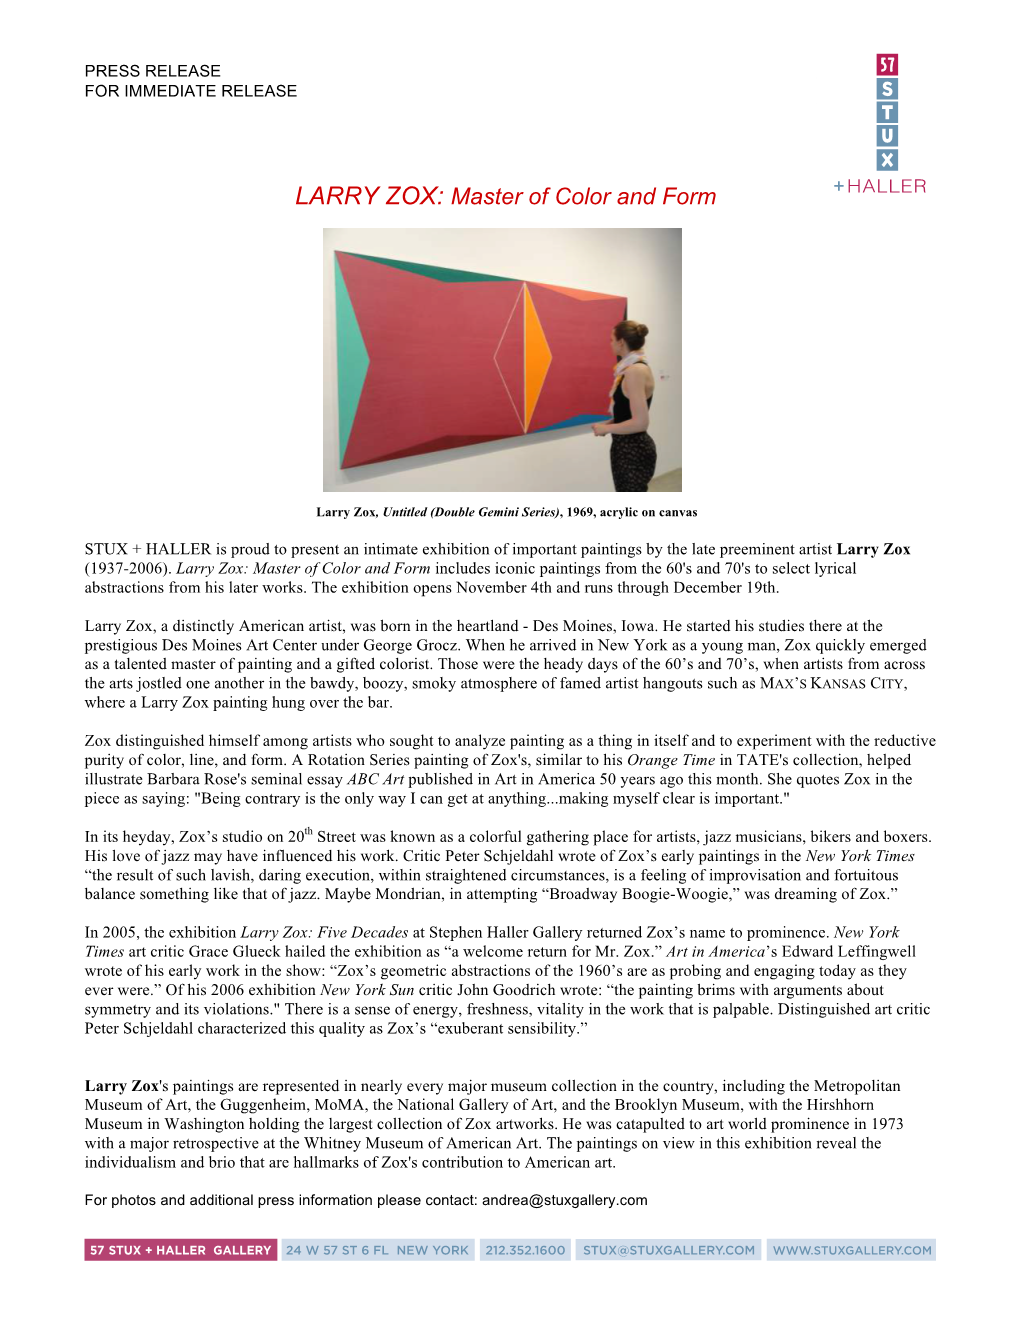 LARRY ZOX: Master of Color and Form + HALLER